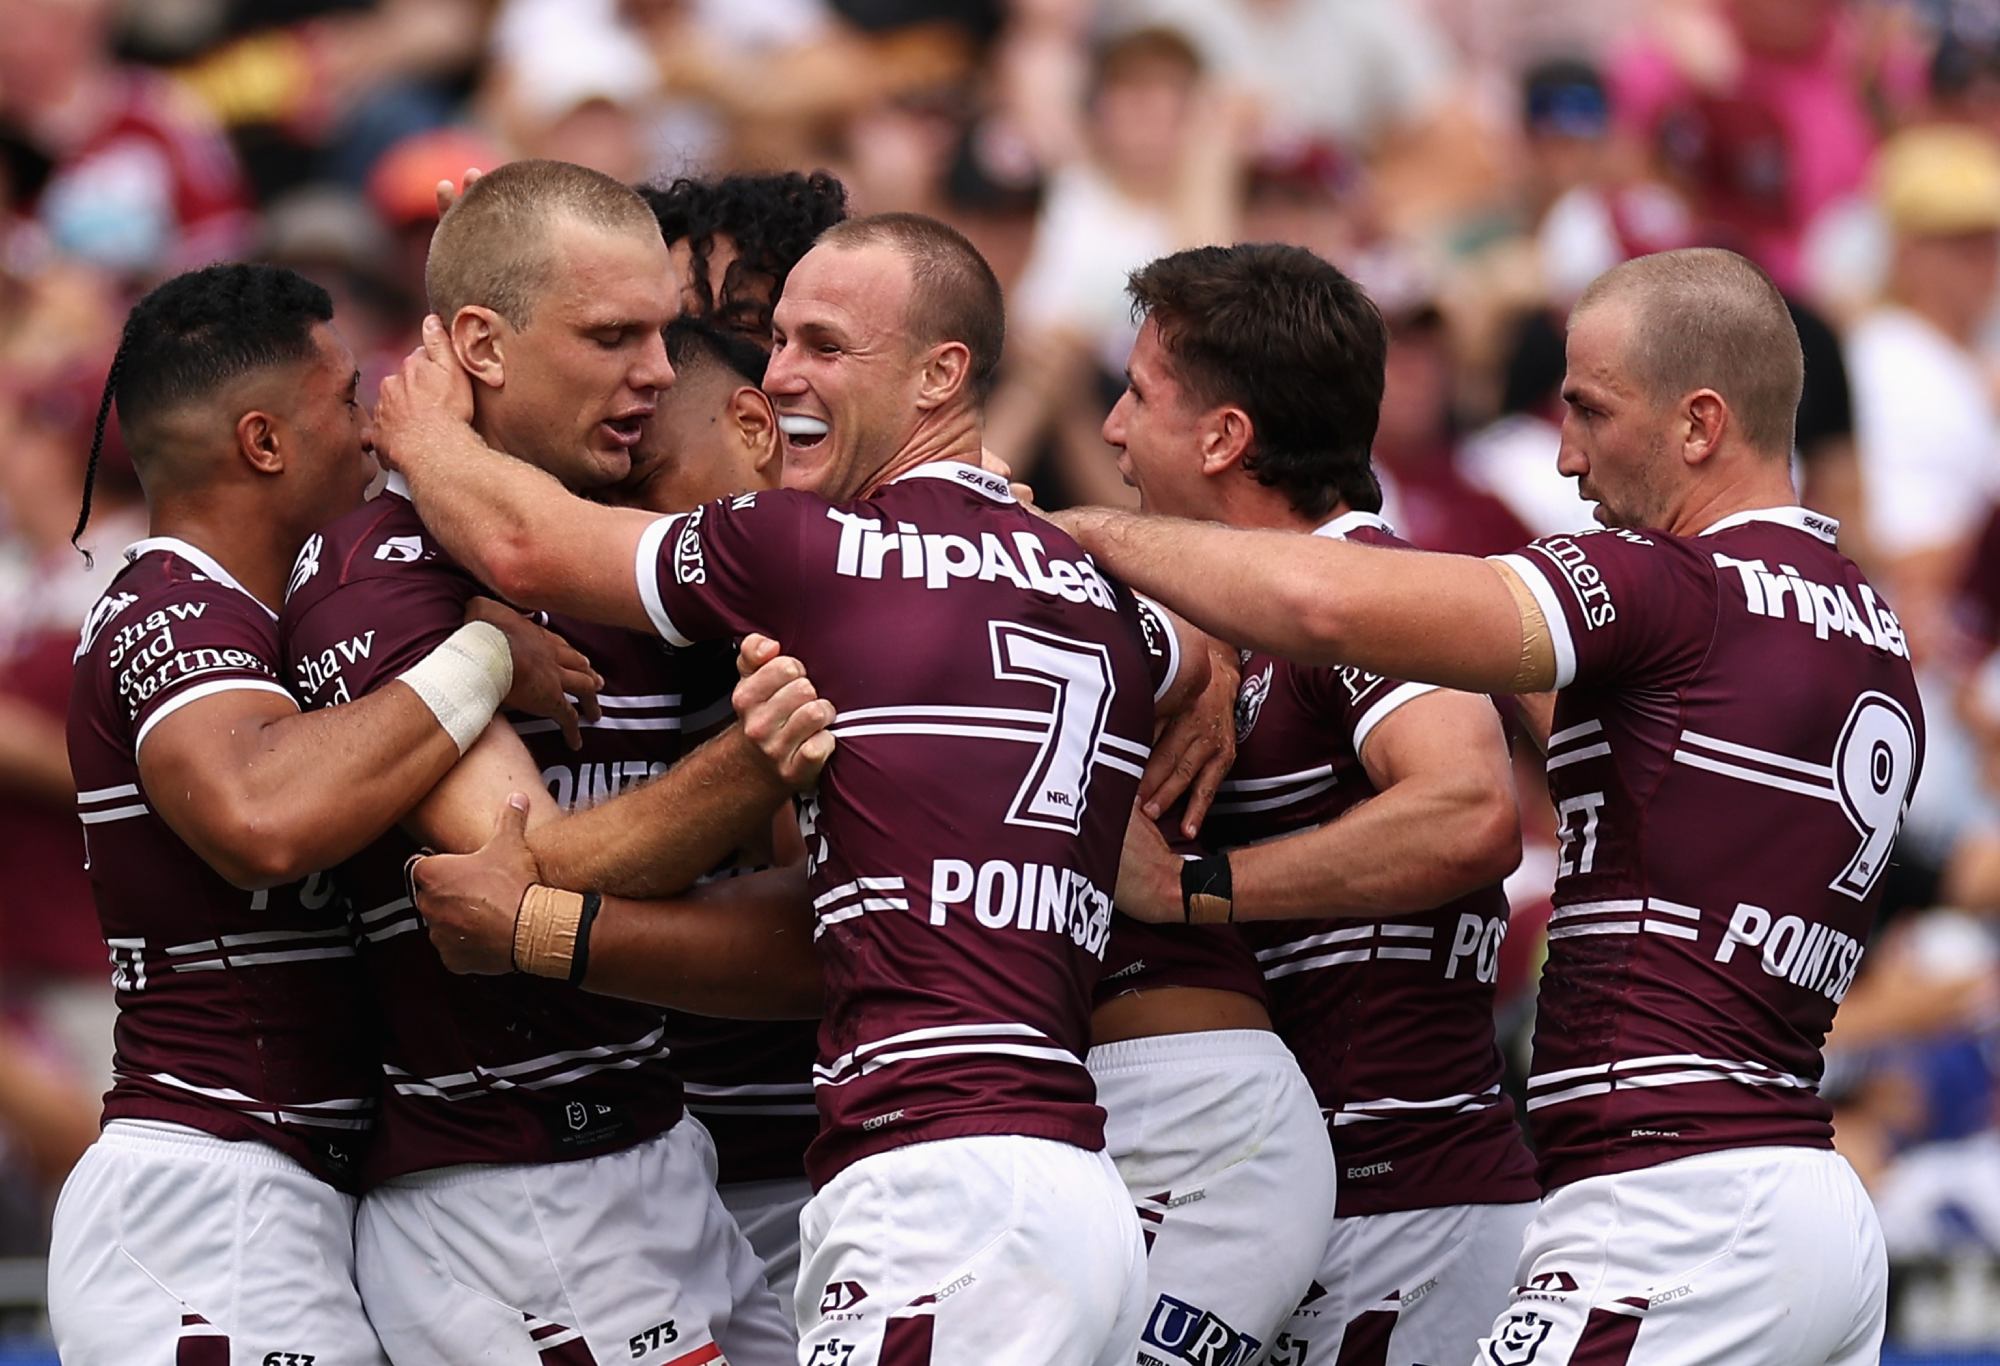 SYDNEY, AUSTRALIA - MARCH 04: Tom Trbojevic of the Sea Eagles celebrates scoring a try with team mates during the round one NRL match between the Manly Sea Eagles and the Canterbury Bulldogs at 4 Pines Park on March 04, 2023 in Sydney, Australia. (Photo by Cameron Spencer/Getty Images)